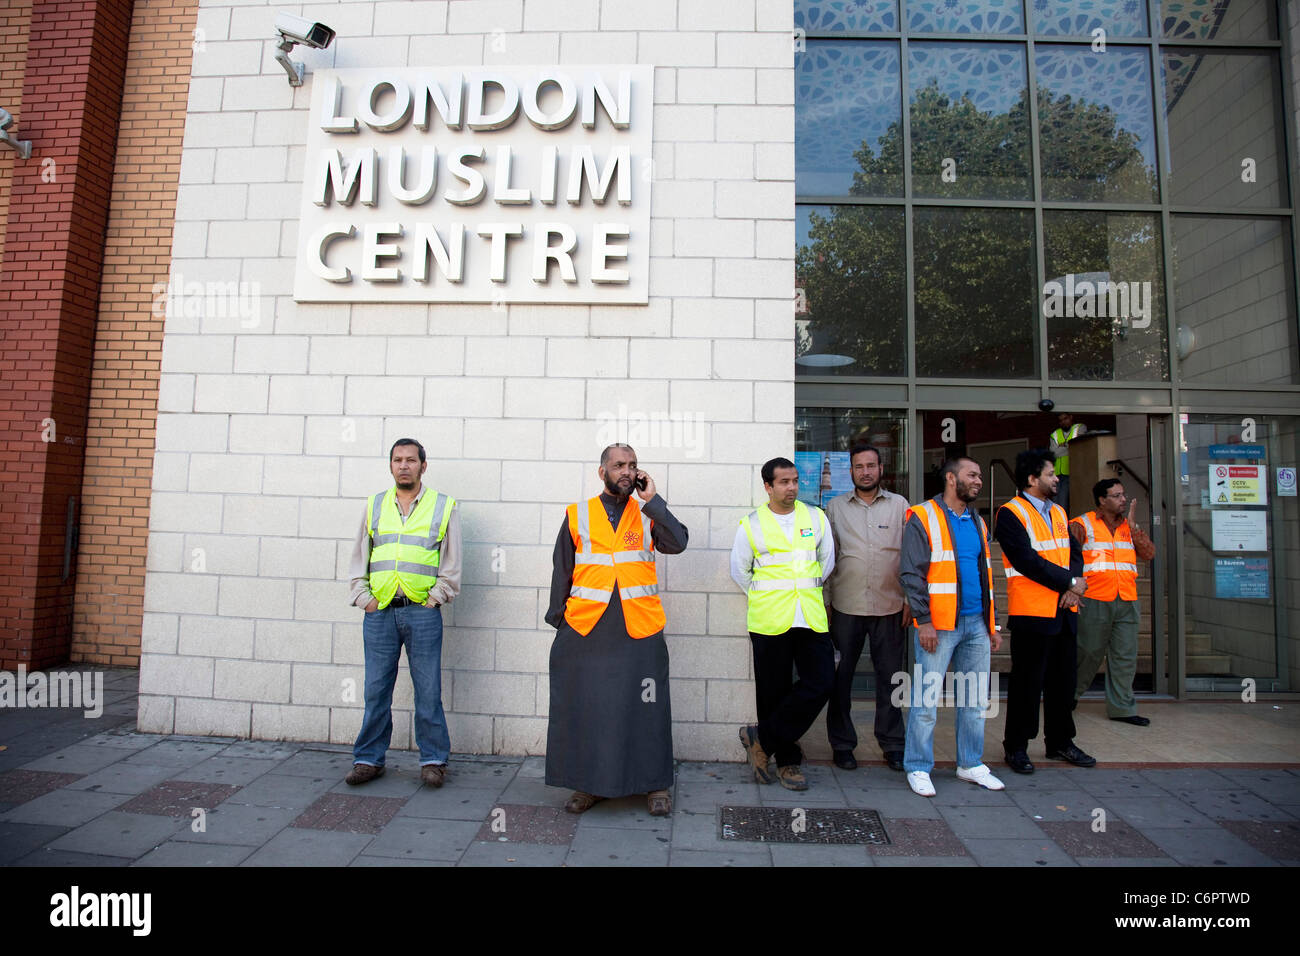 Anti fascism rally in Whitechapel, East London. Tower Hamlets unite. Protecting the London Muslim Centre. Stock Photo